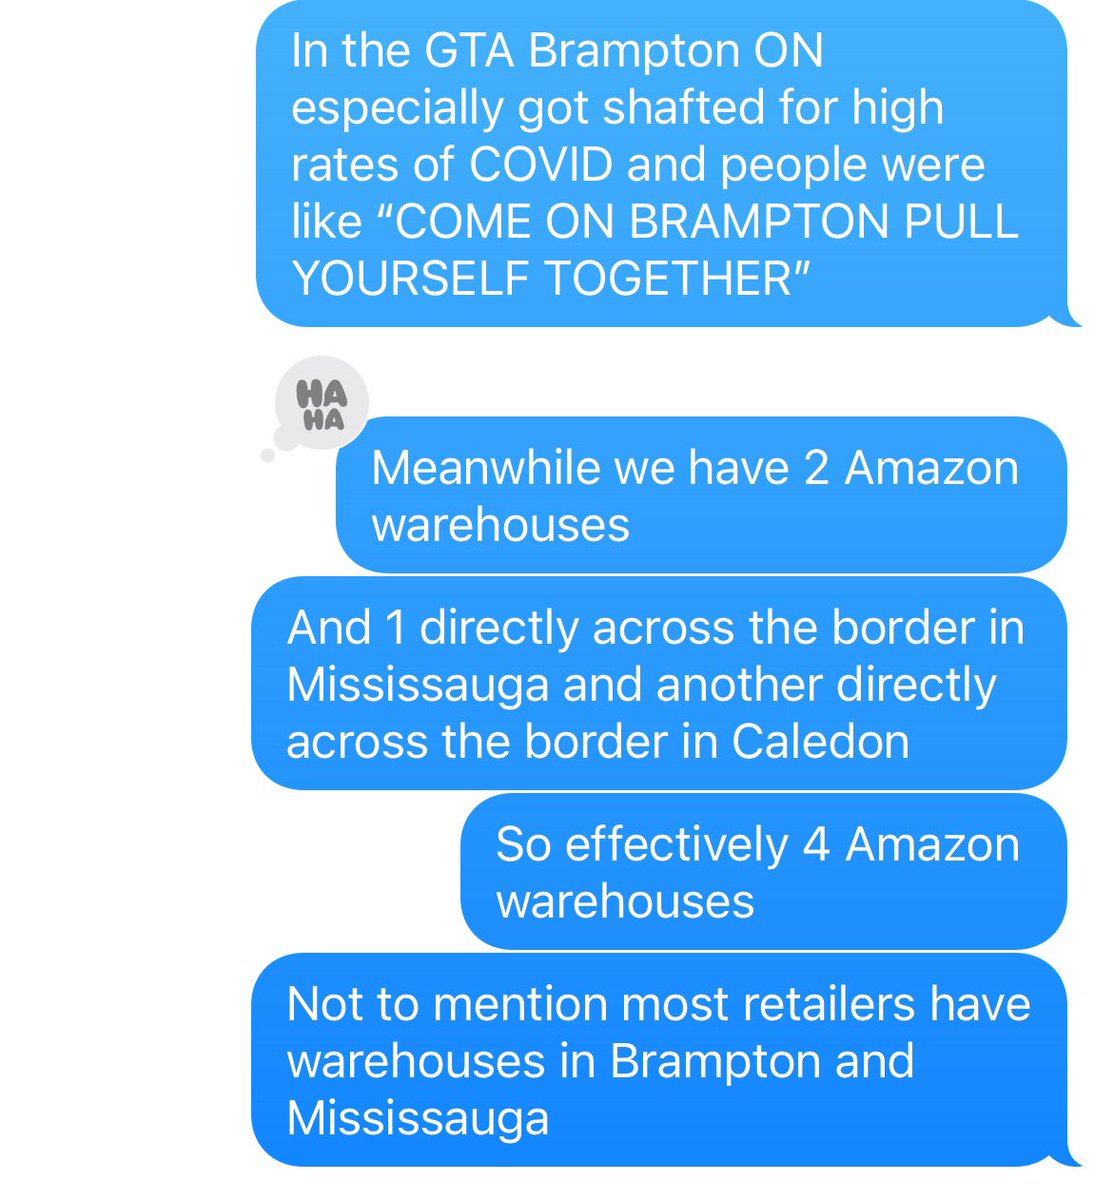 i was actually getting angry earlier today about the way people talked about Brampton during the pandemic, telling two friends who are not from the GTA about it